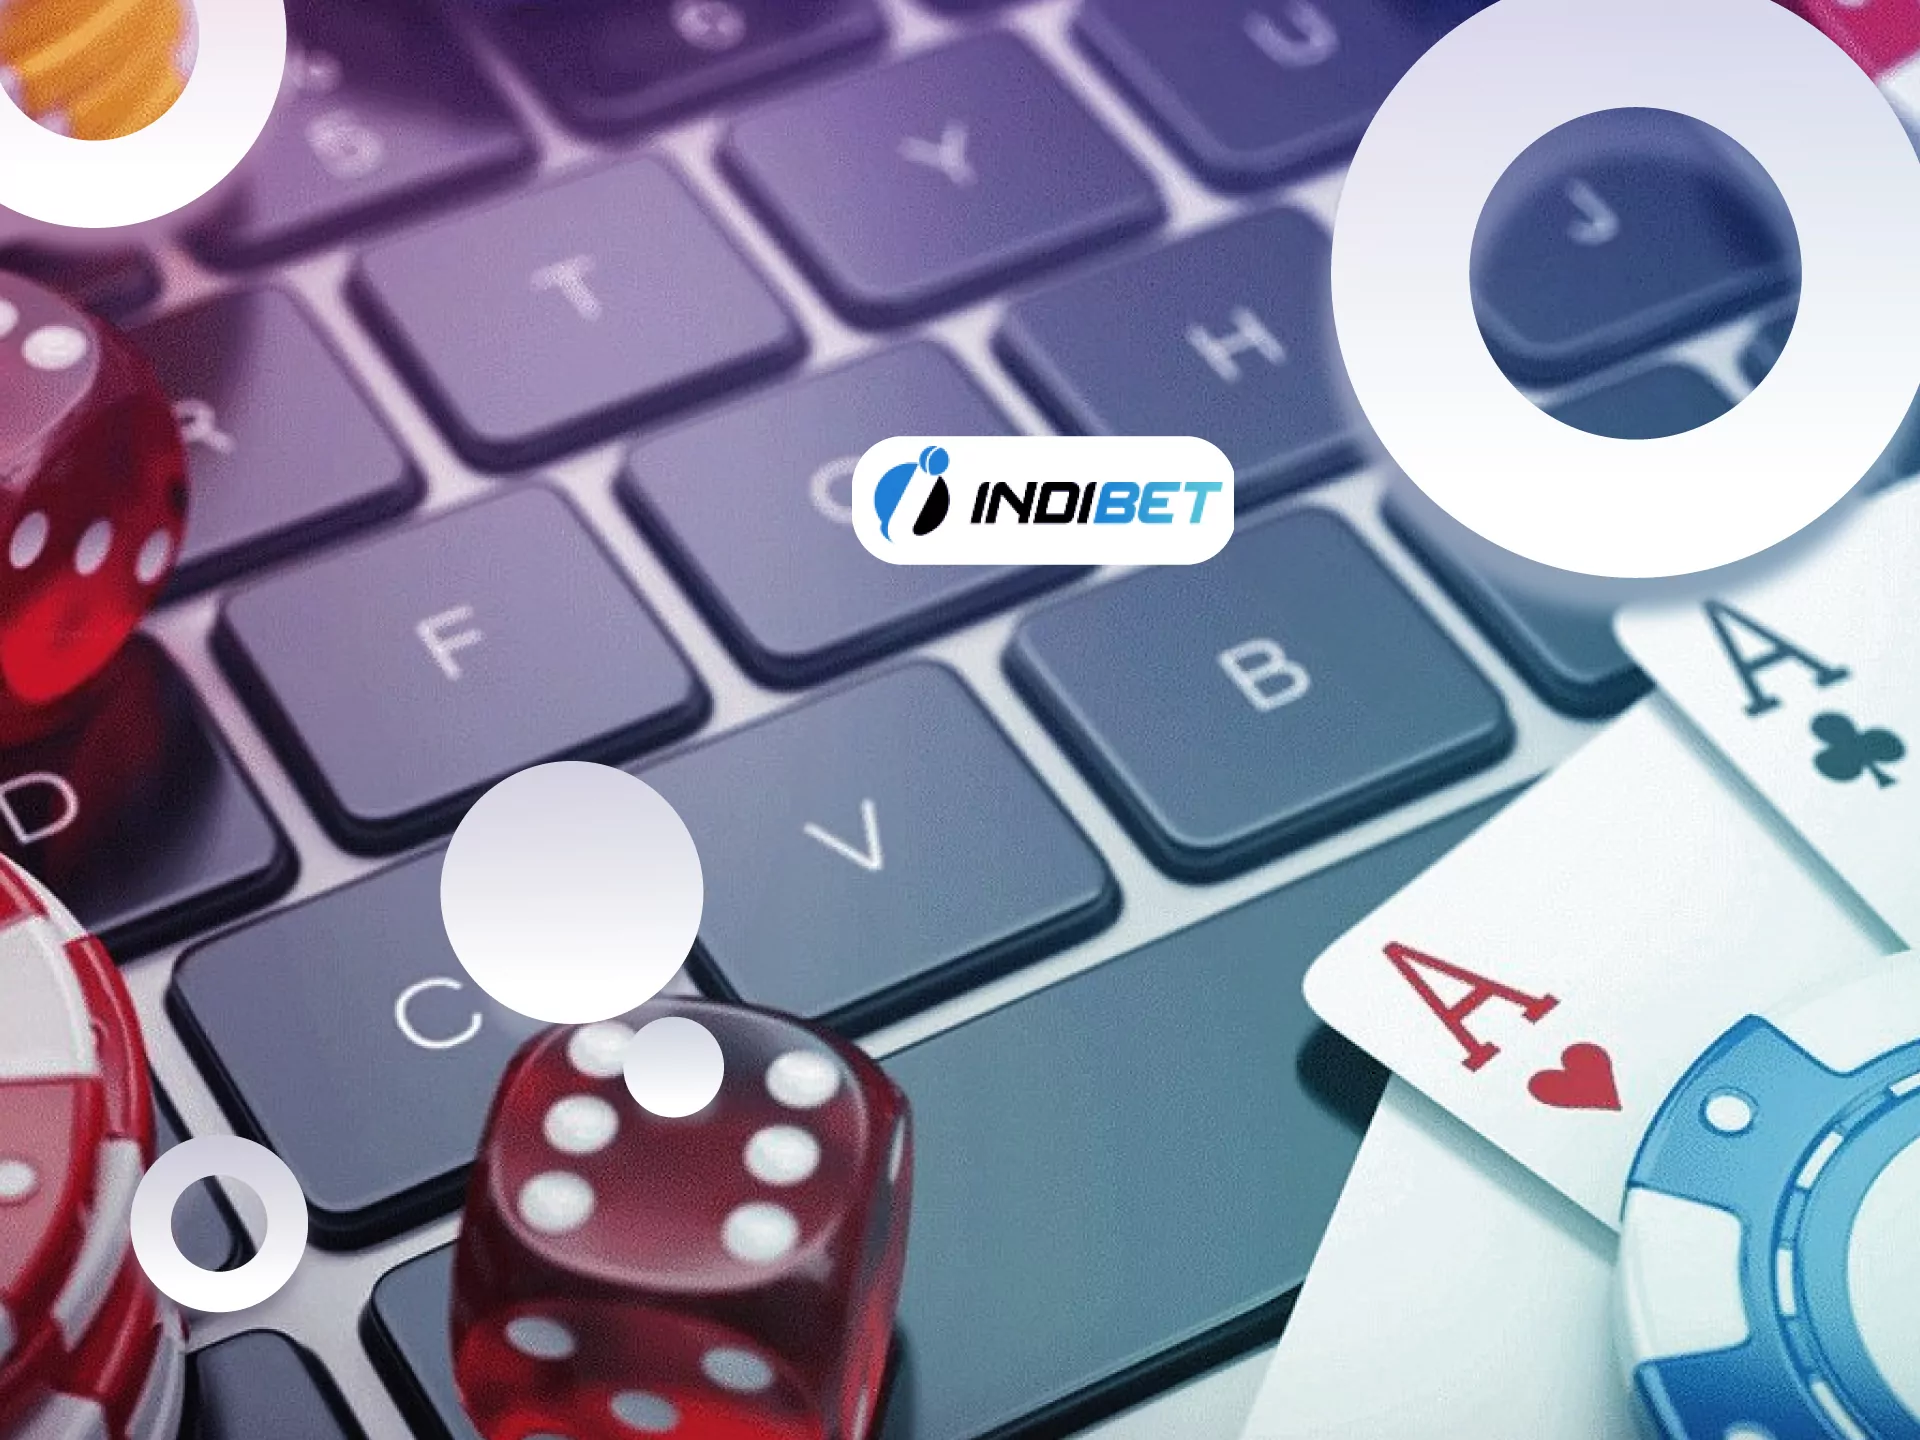 You can also play virtual games and win money from it at Indibet.